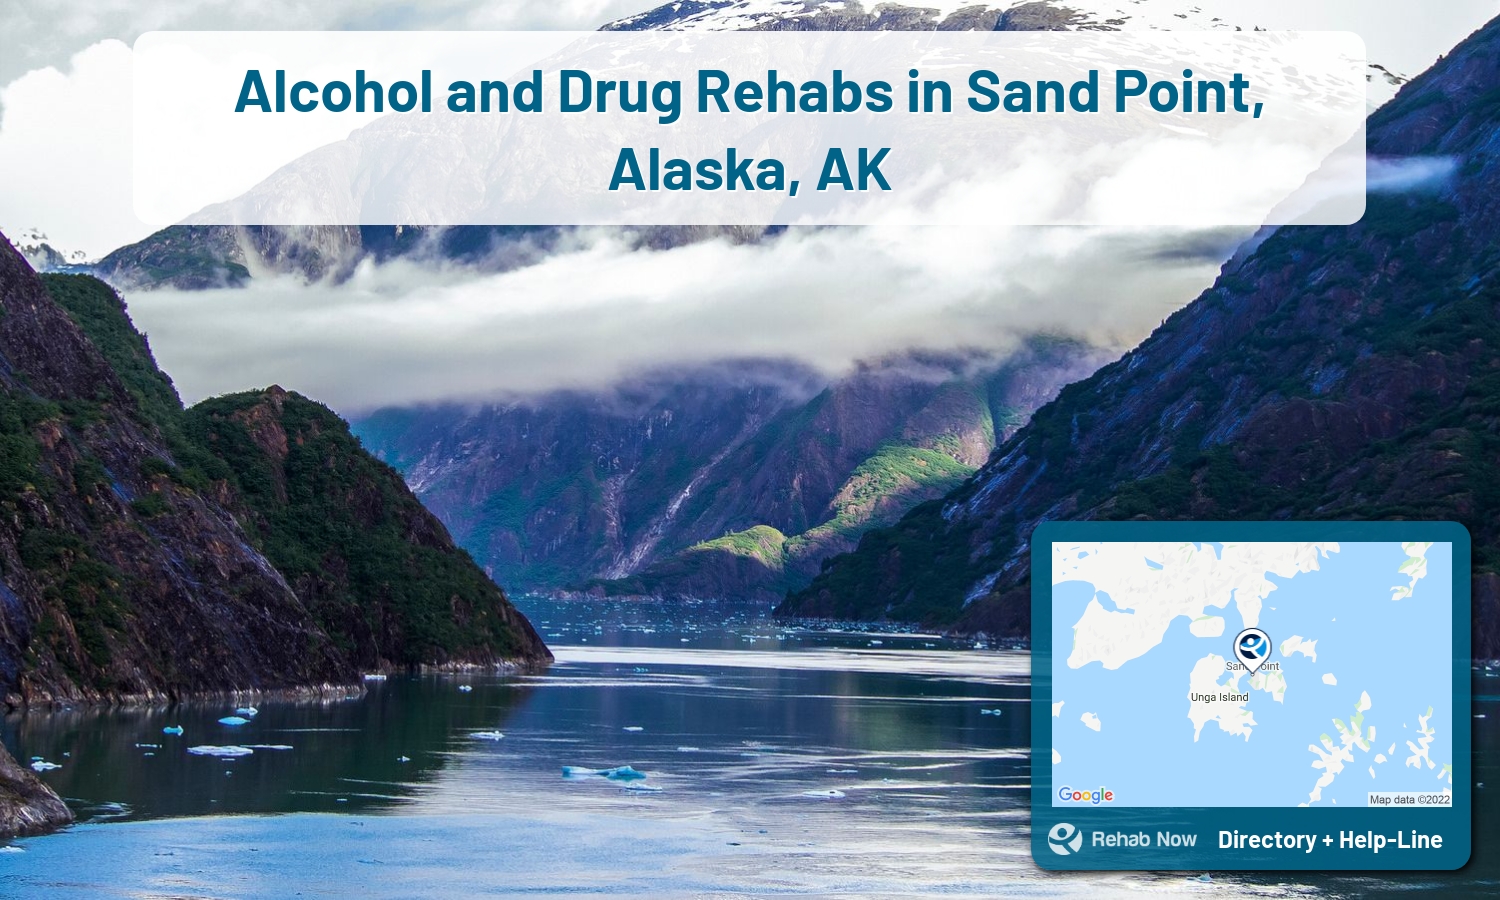 Drug rehab and alcohol treatment services nearby Sand Point, AK. Need help choosing a treatment program? Call our free hotline!